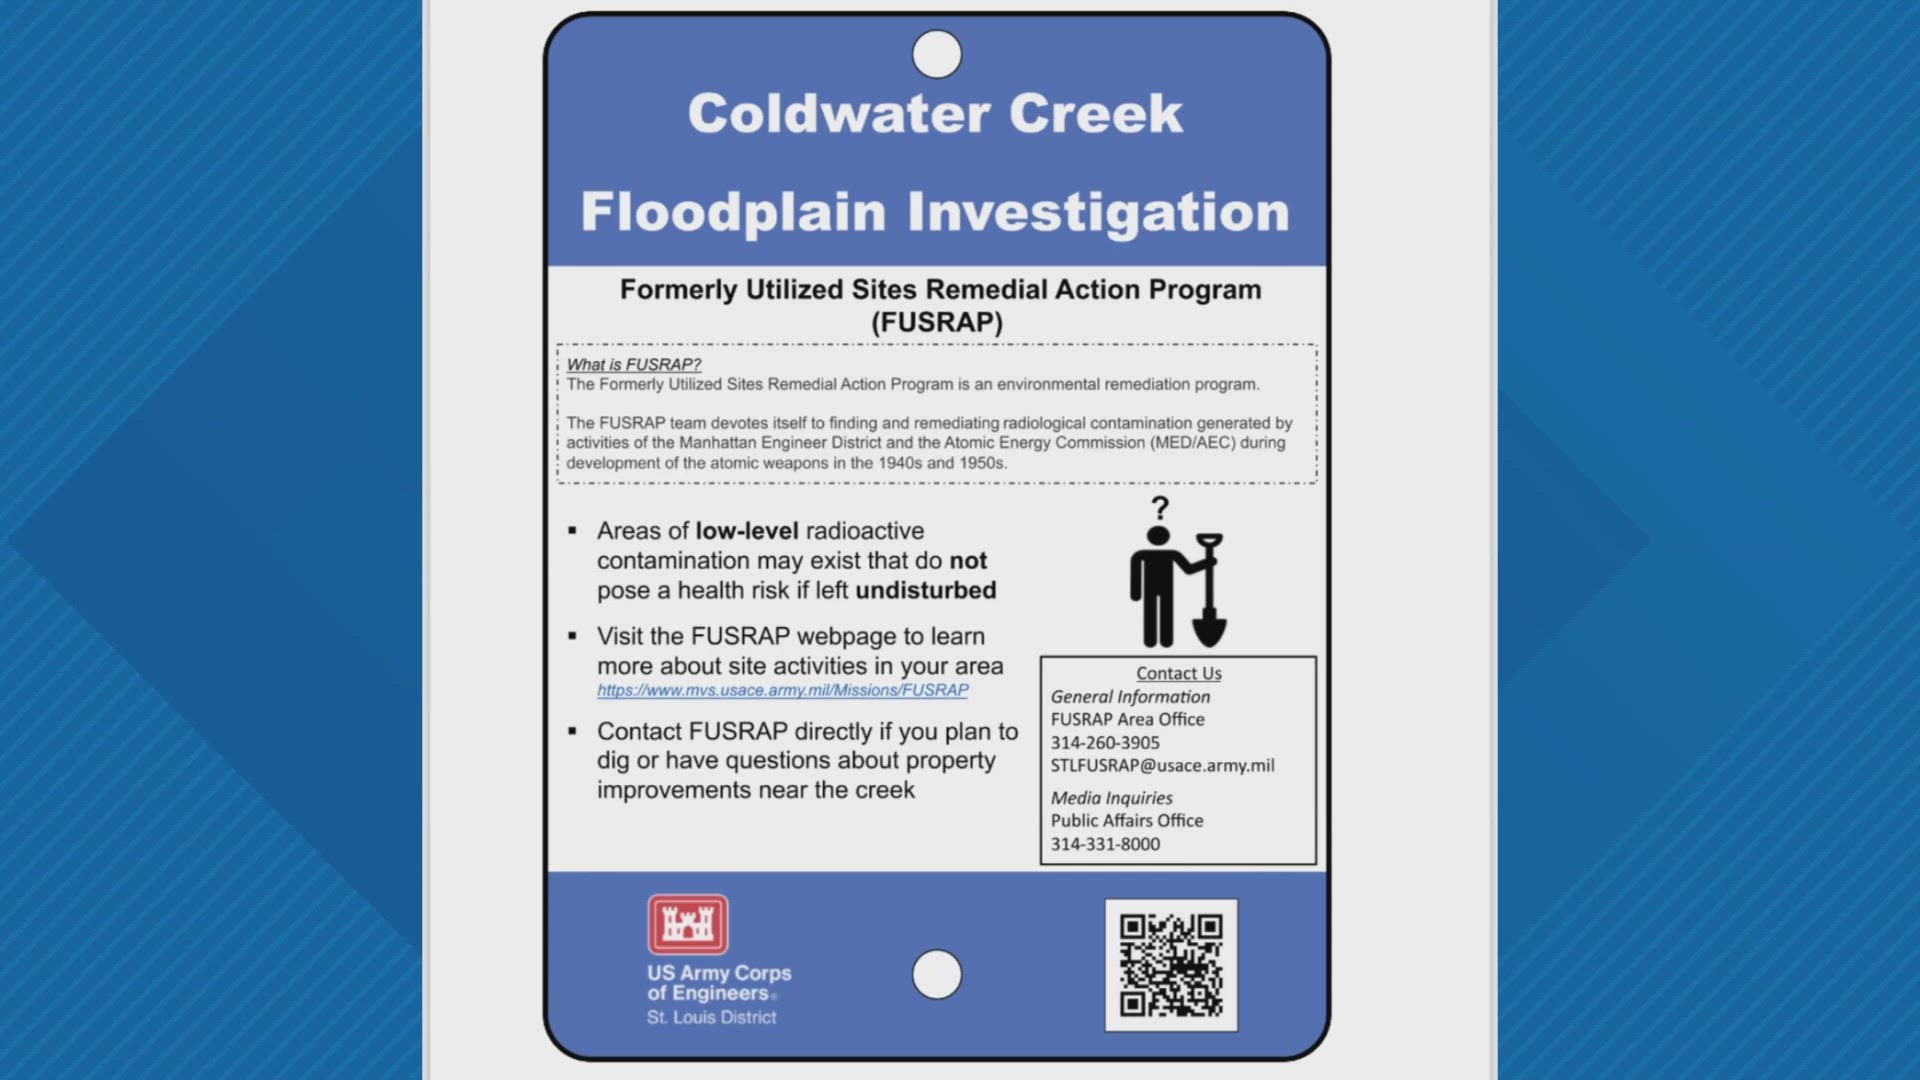 A federal agency wants to put up warning signs around Coldwater Creek. The signs would warn of possible radioactive waste in the area.